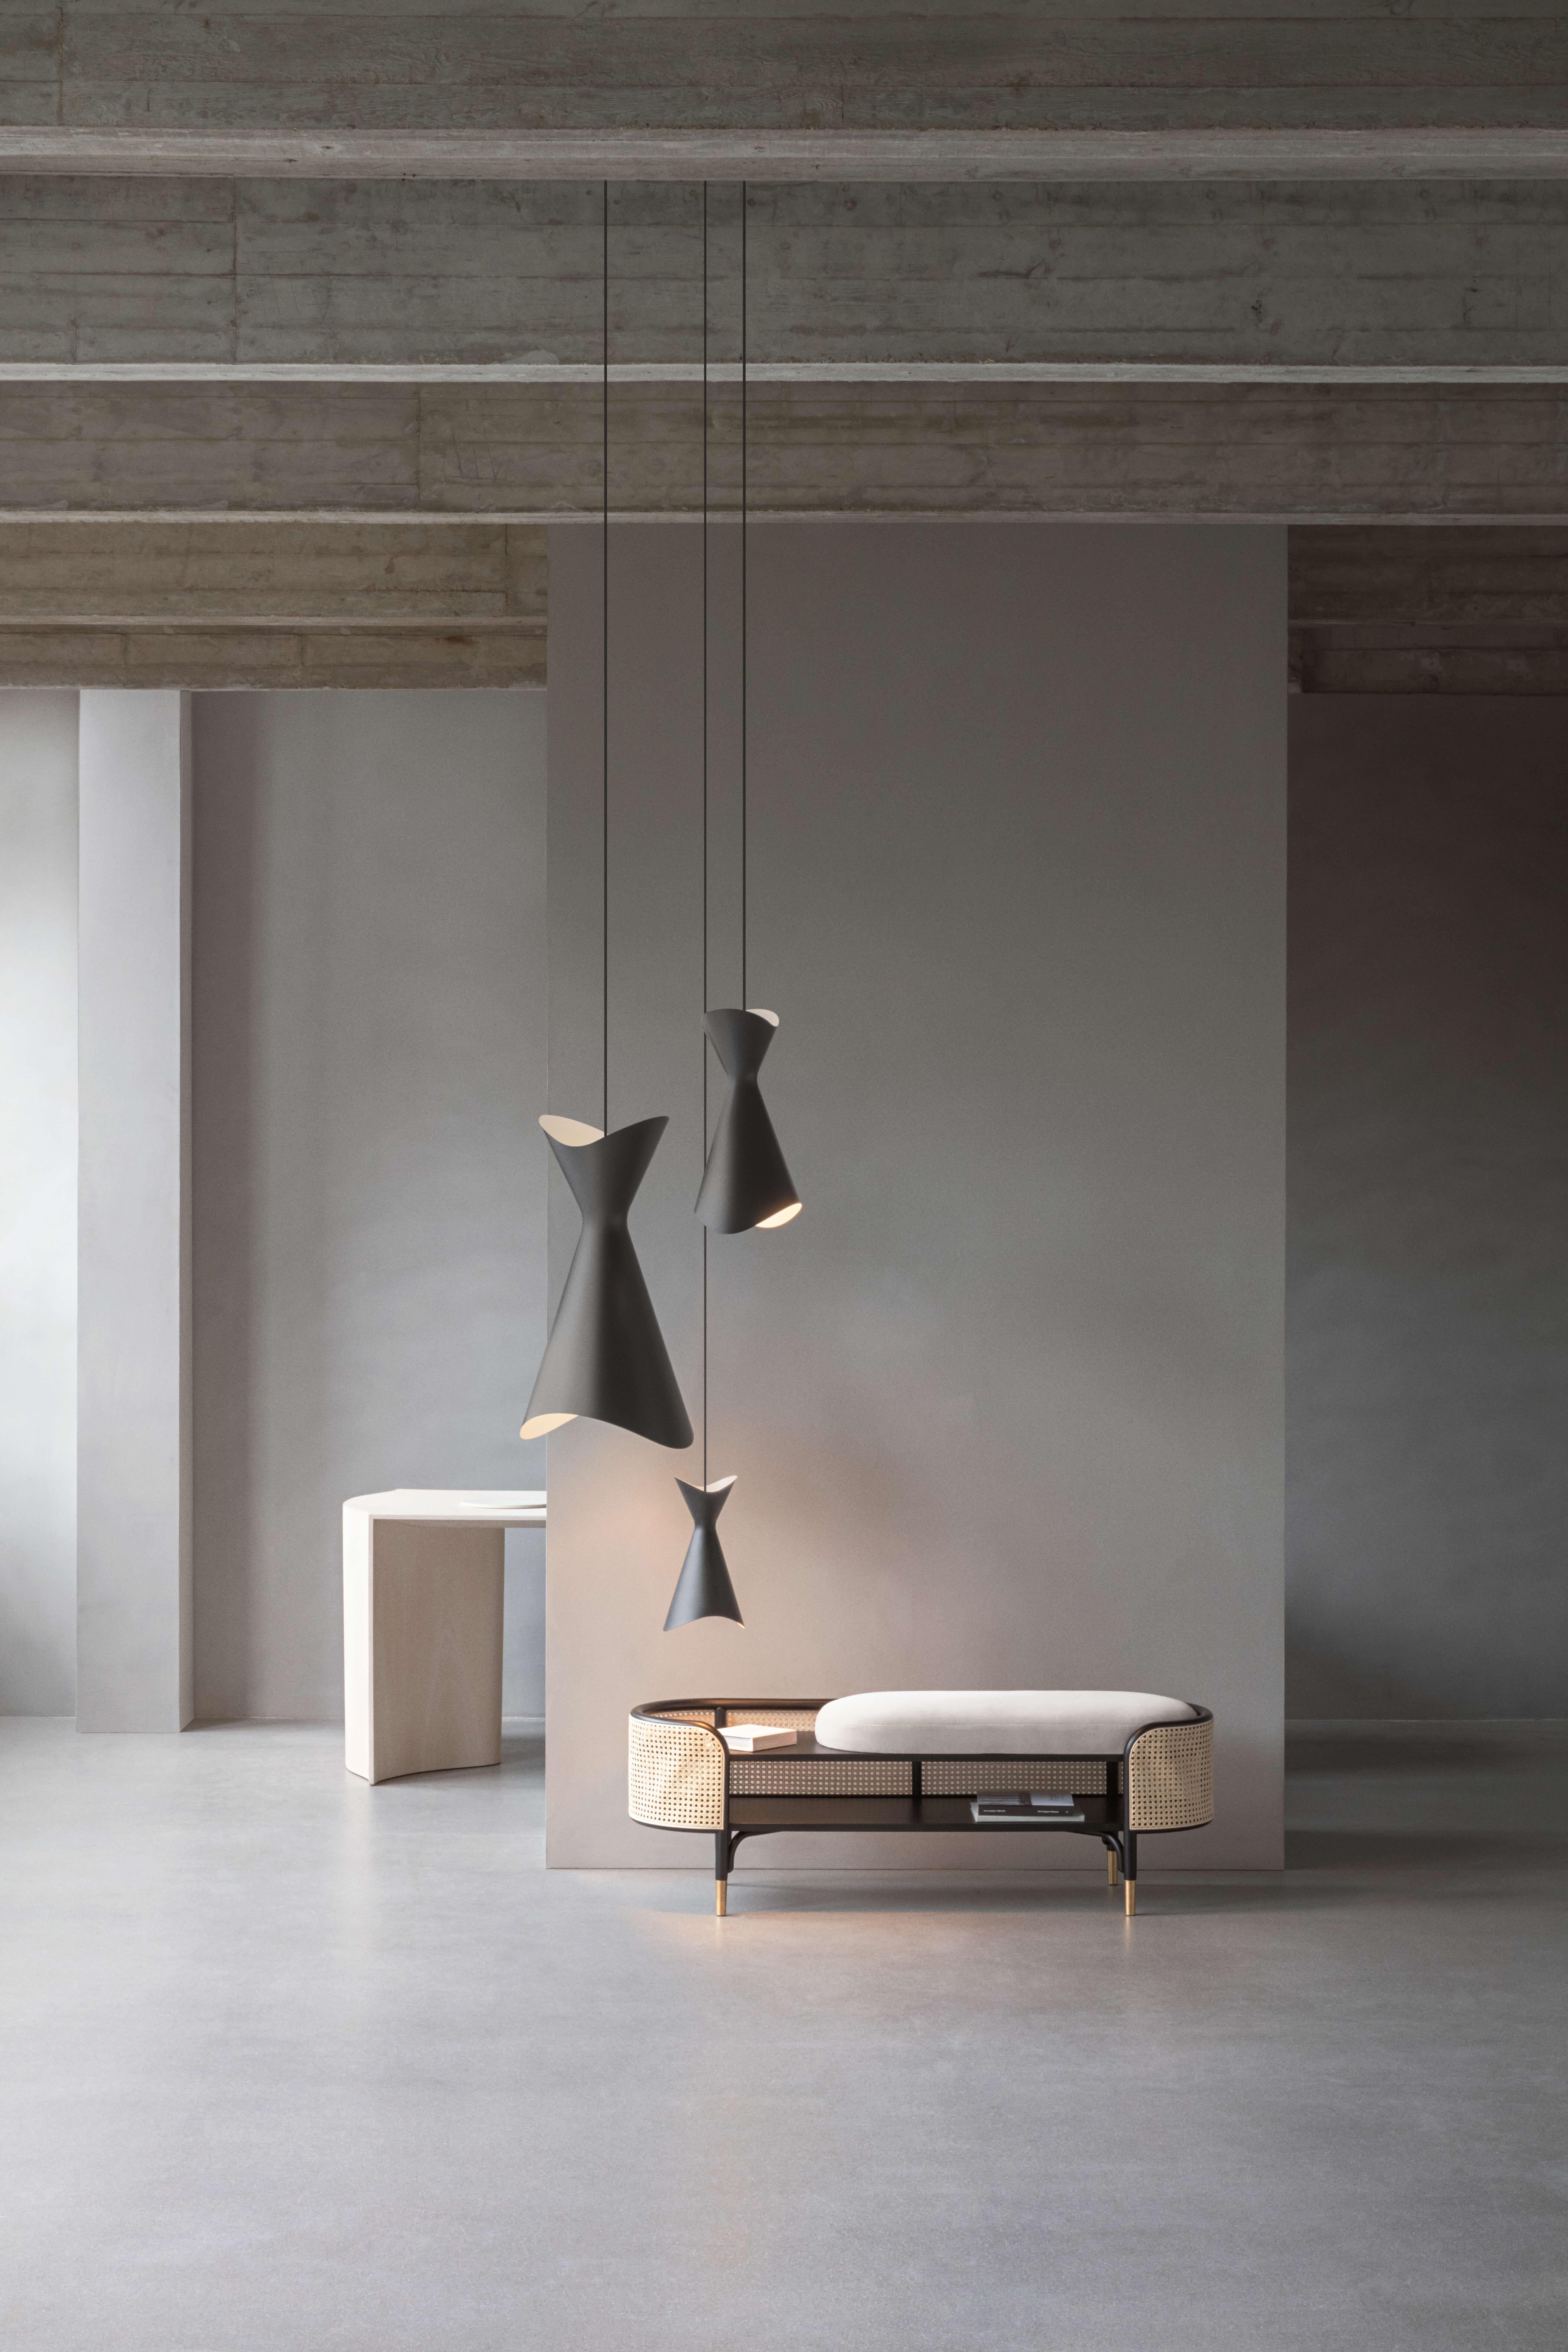 Ninotchka, white pendant lamp by Bent Karlby
Editor: LYFA

Size : H 76,4 x W 42,5 x D 37 cm
Materials : Steel

3m textile cord black or white, depending lampshade color

Light source (Not included)
Socket: E27
Max wattage: 60 Watt
Energy